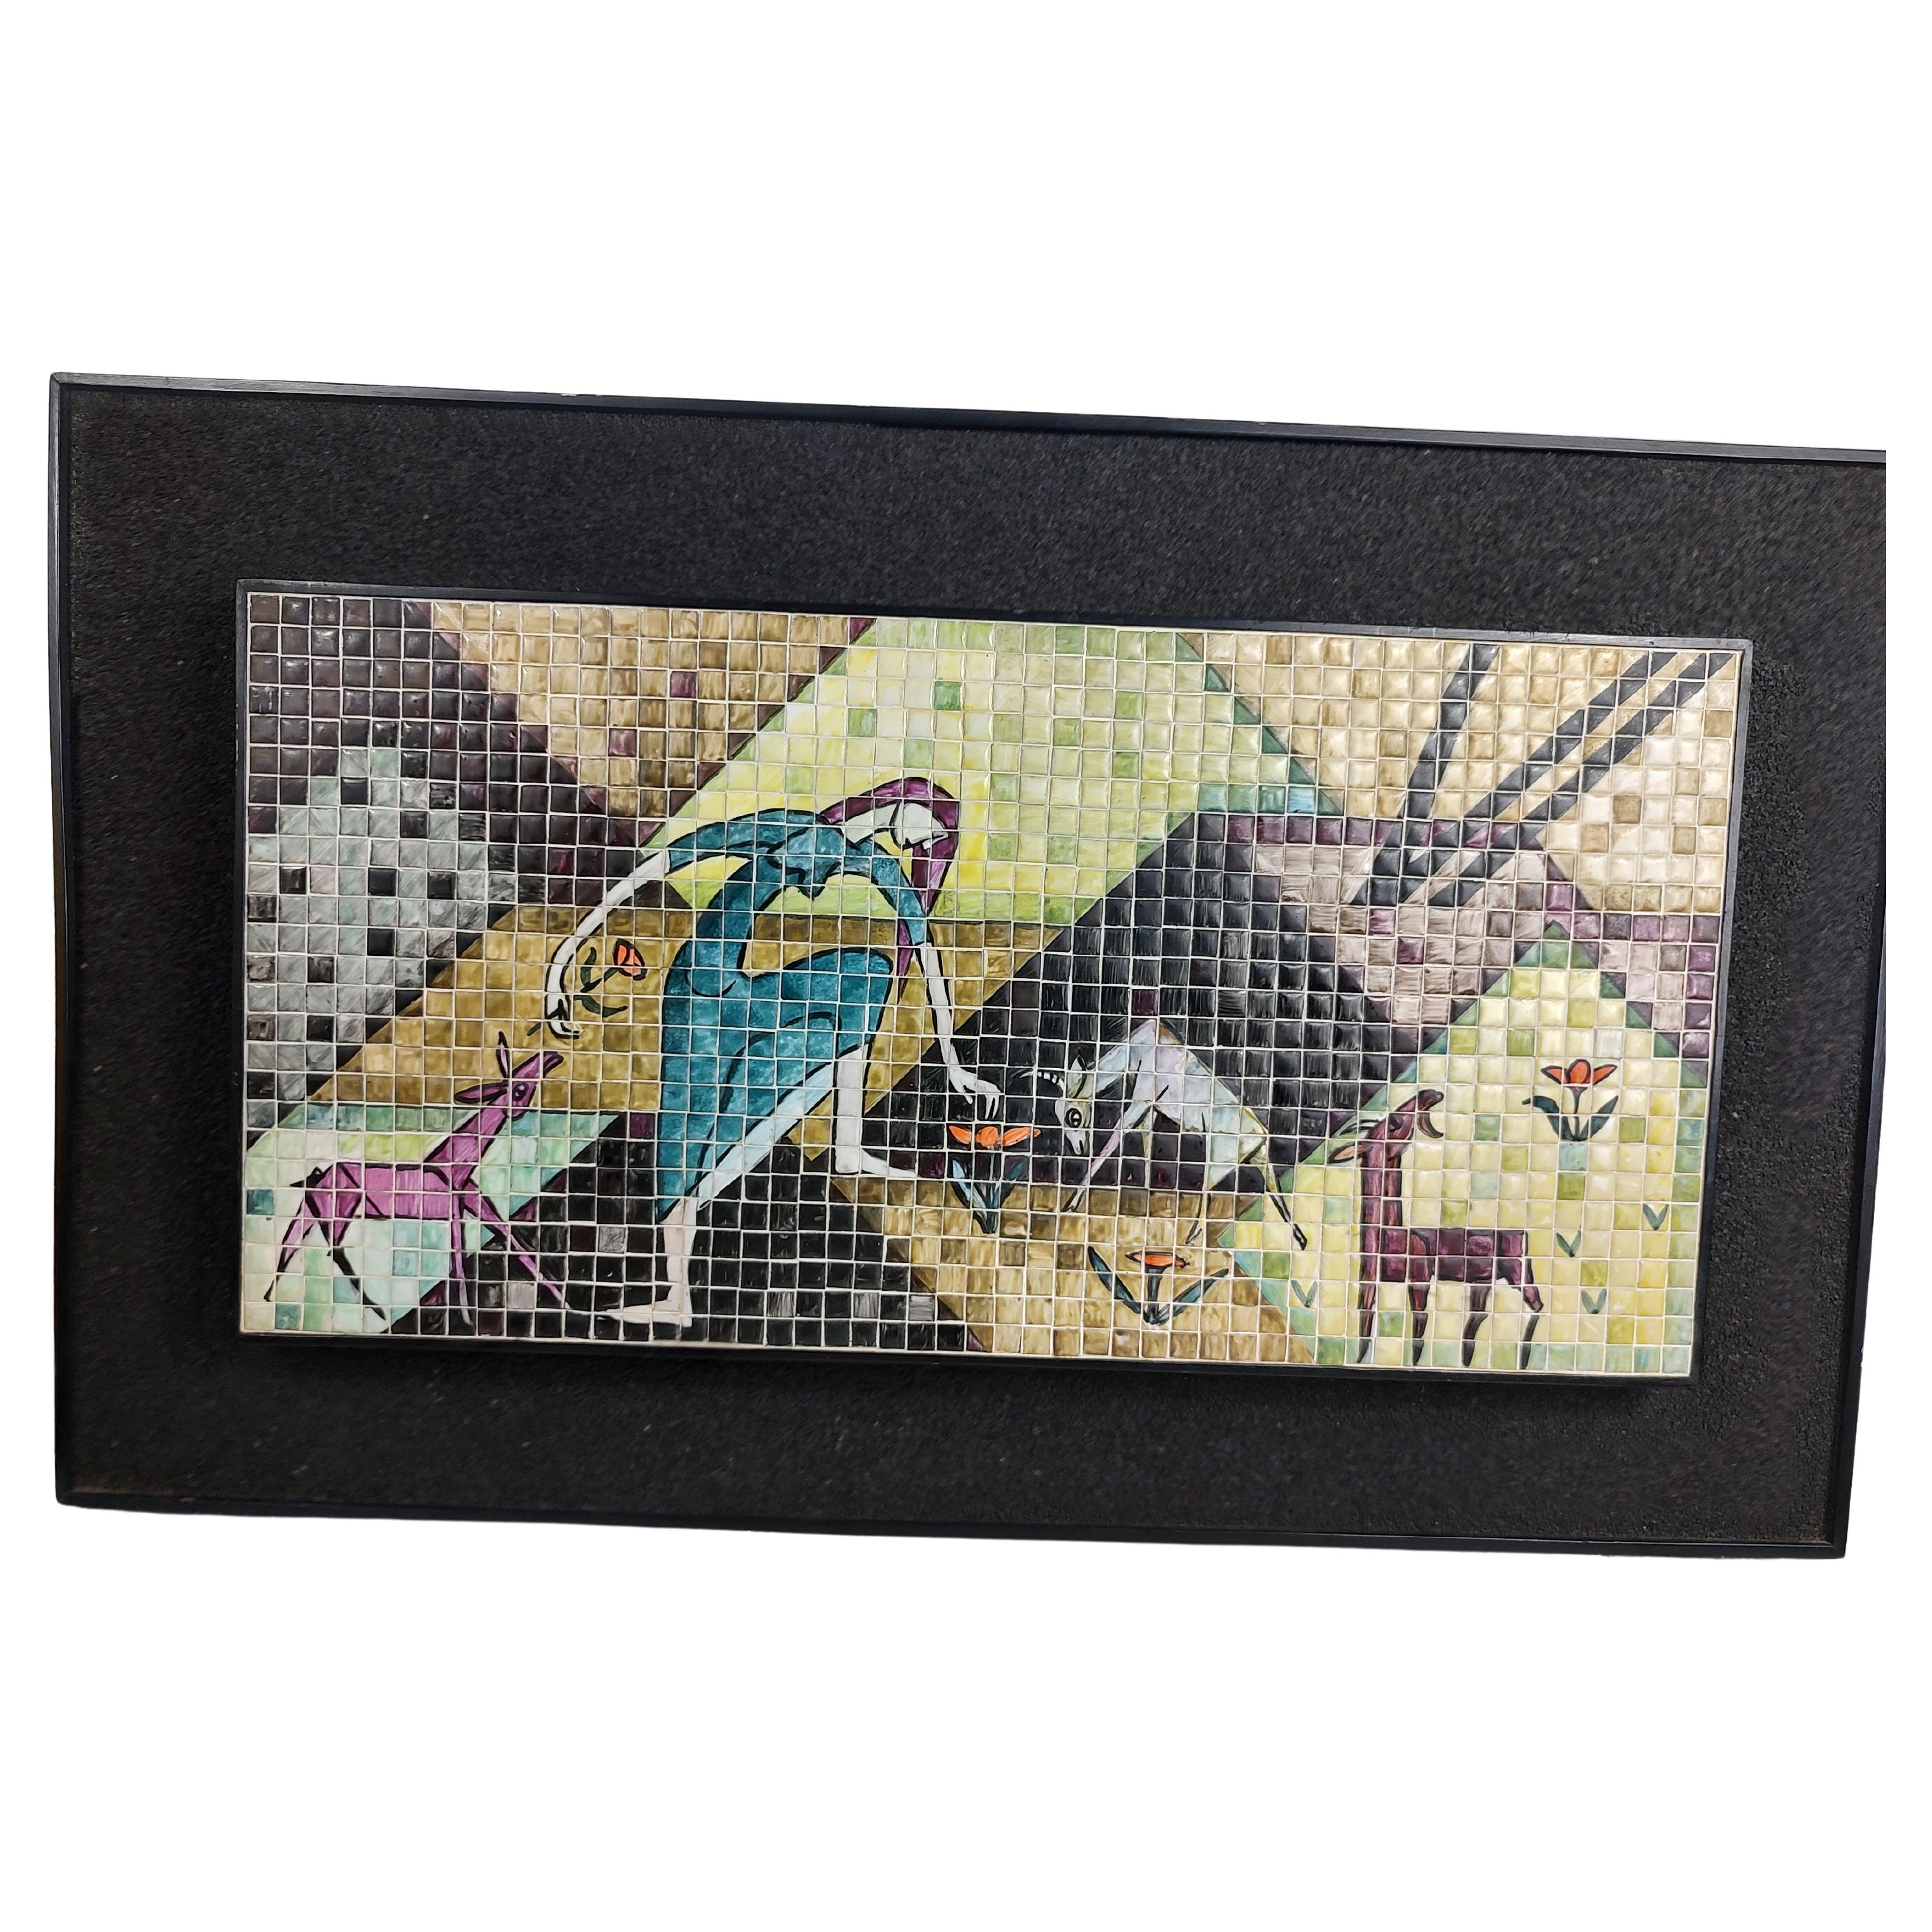 Mid-Century Modern Sculptural Framed Mosaic Tile Art of Woman with Goats For Sale